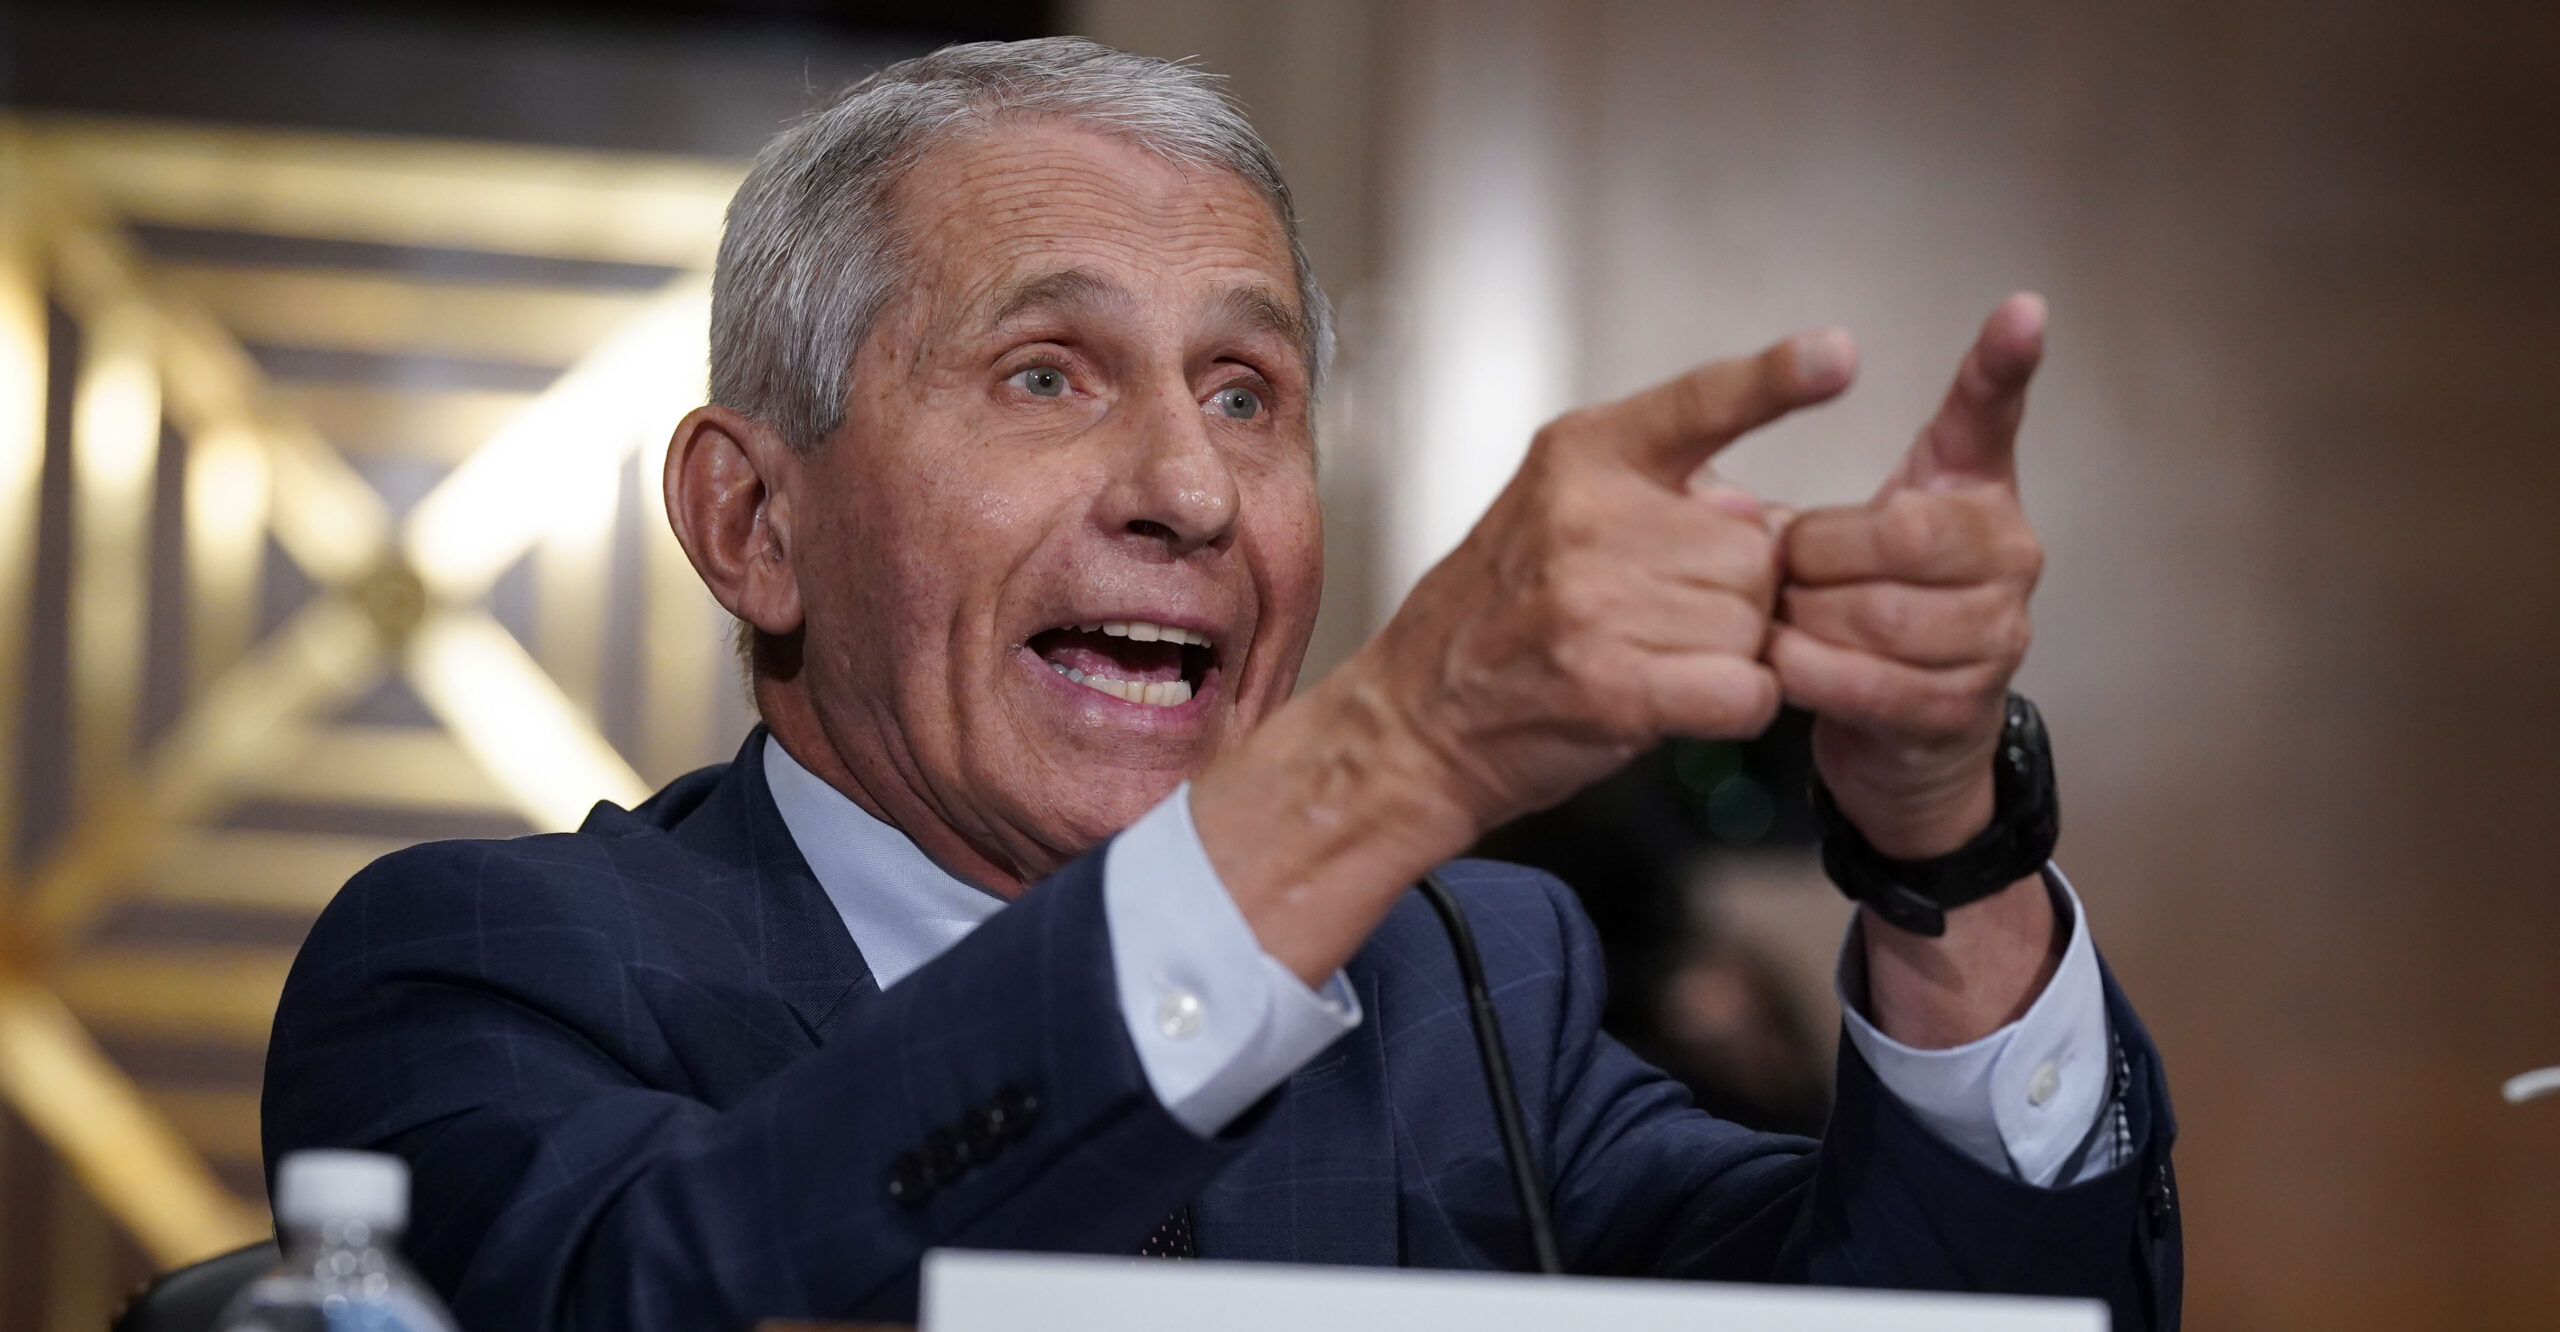 Fauci v. Paul and 3 Other Takeaways From Senate COVID-19 Hearing